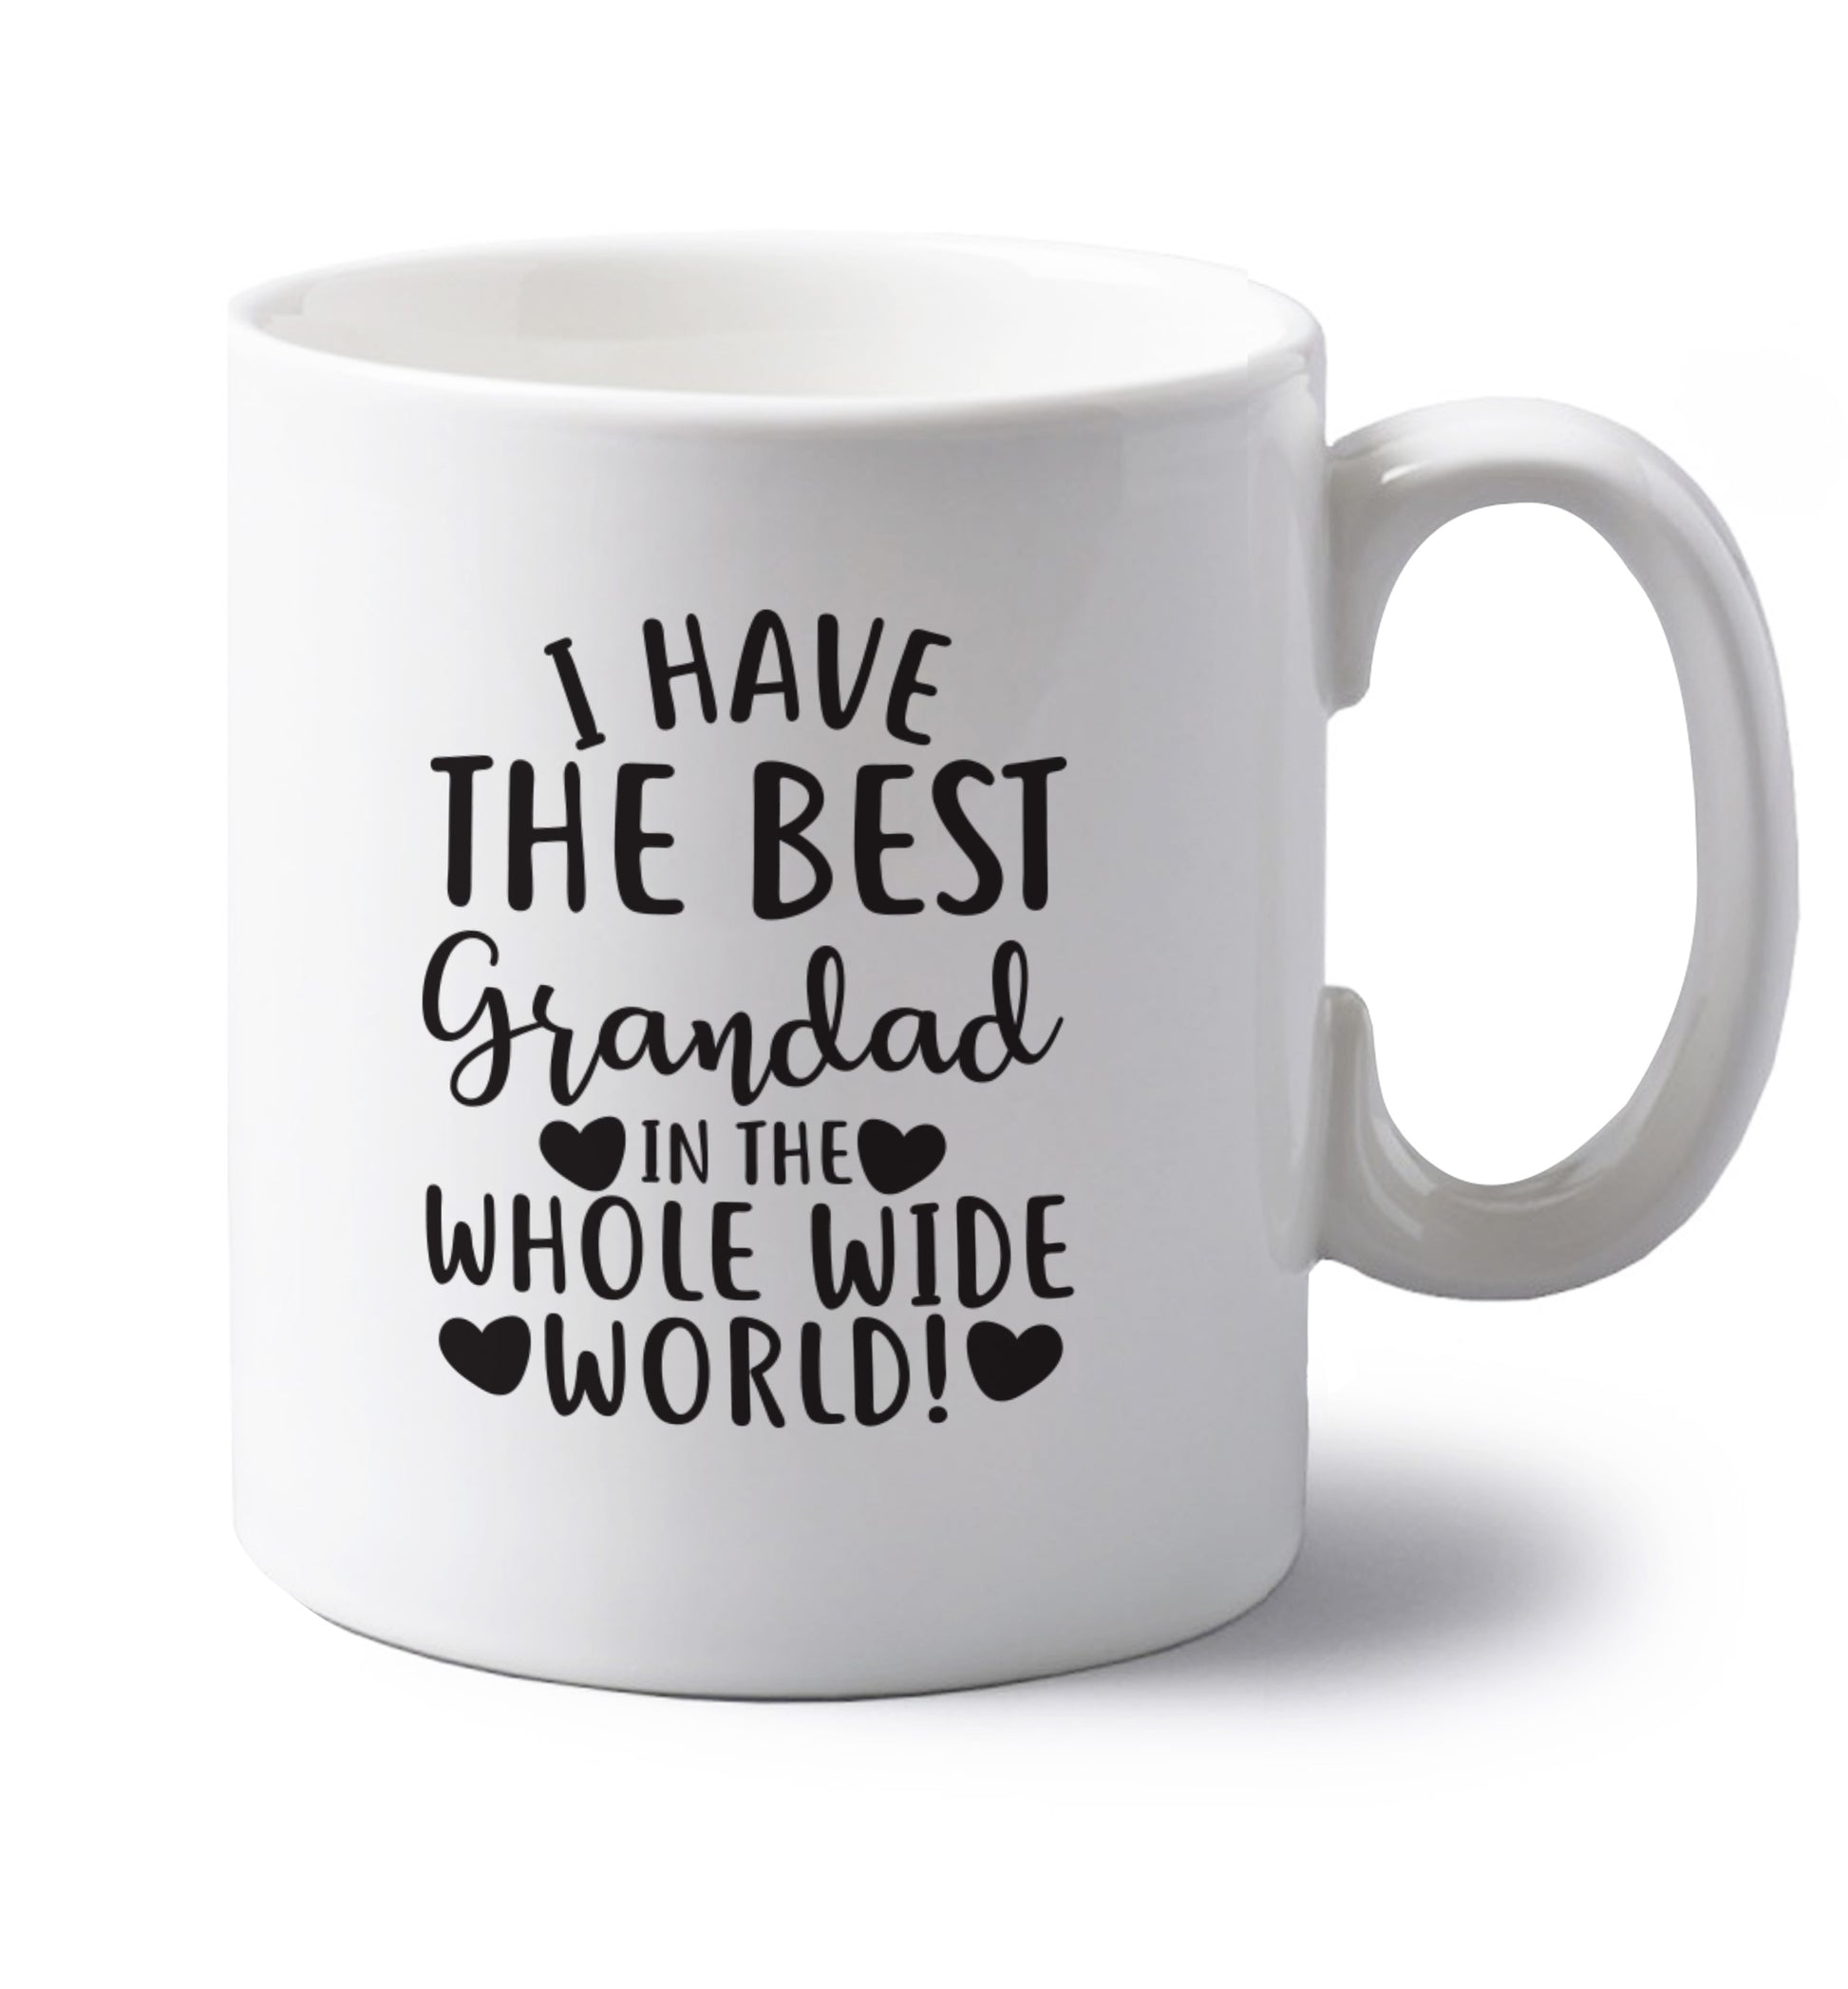 I have the best grandad in the whole wide world! left handed white ceramic mug 